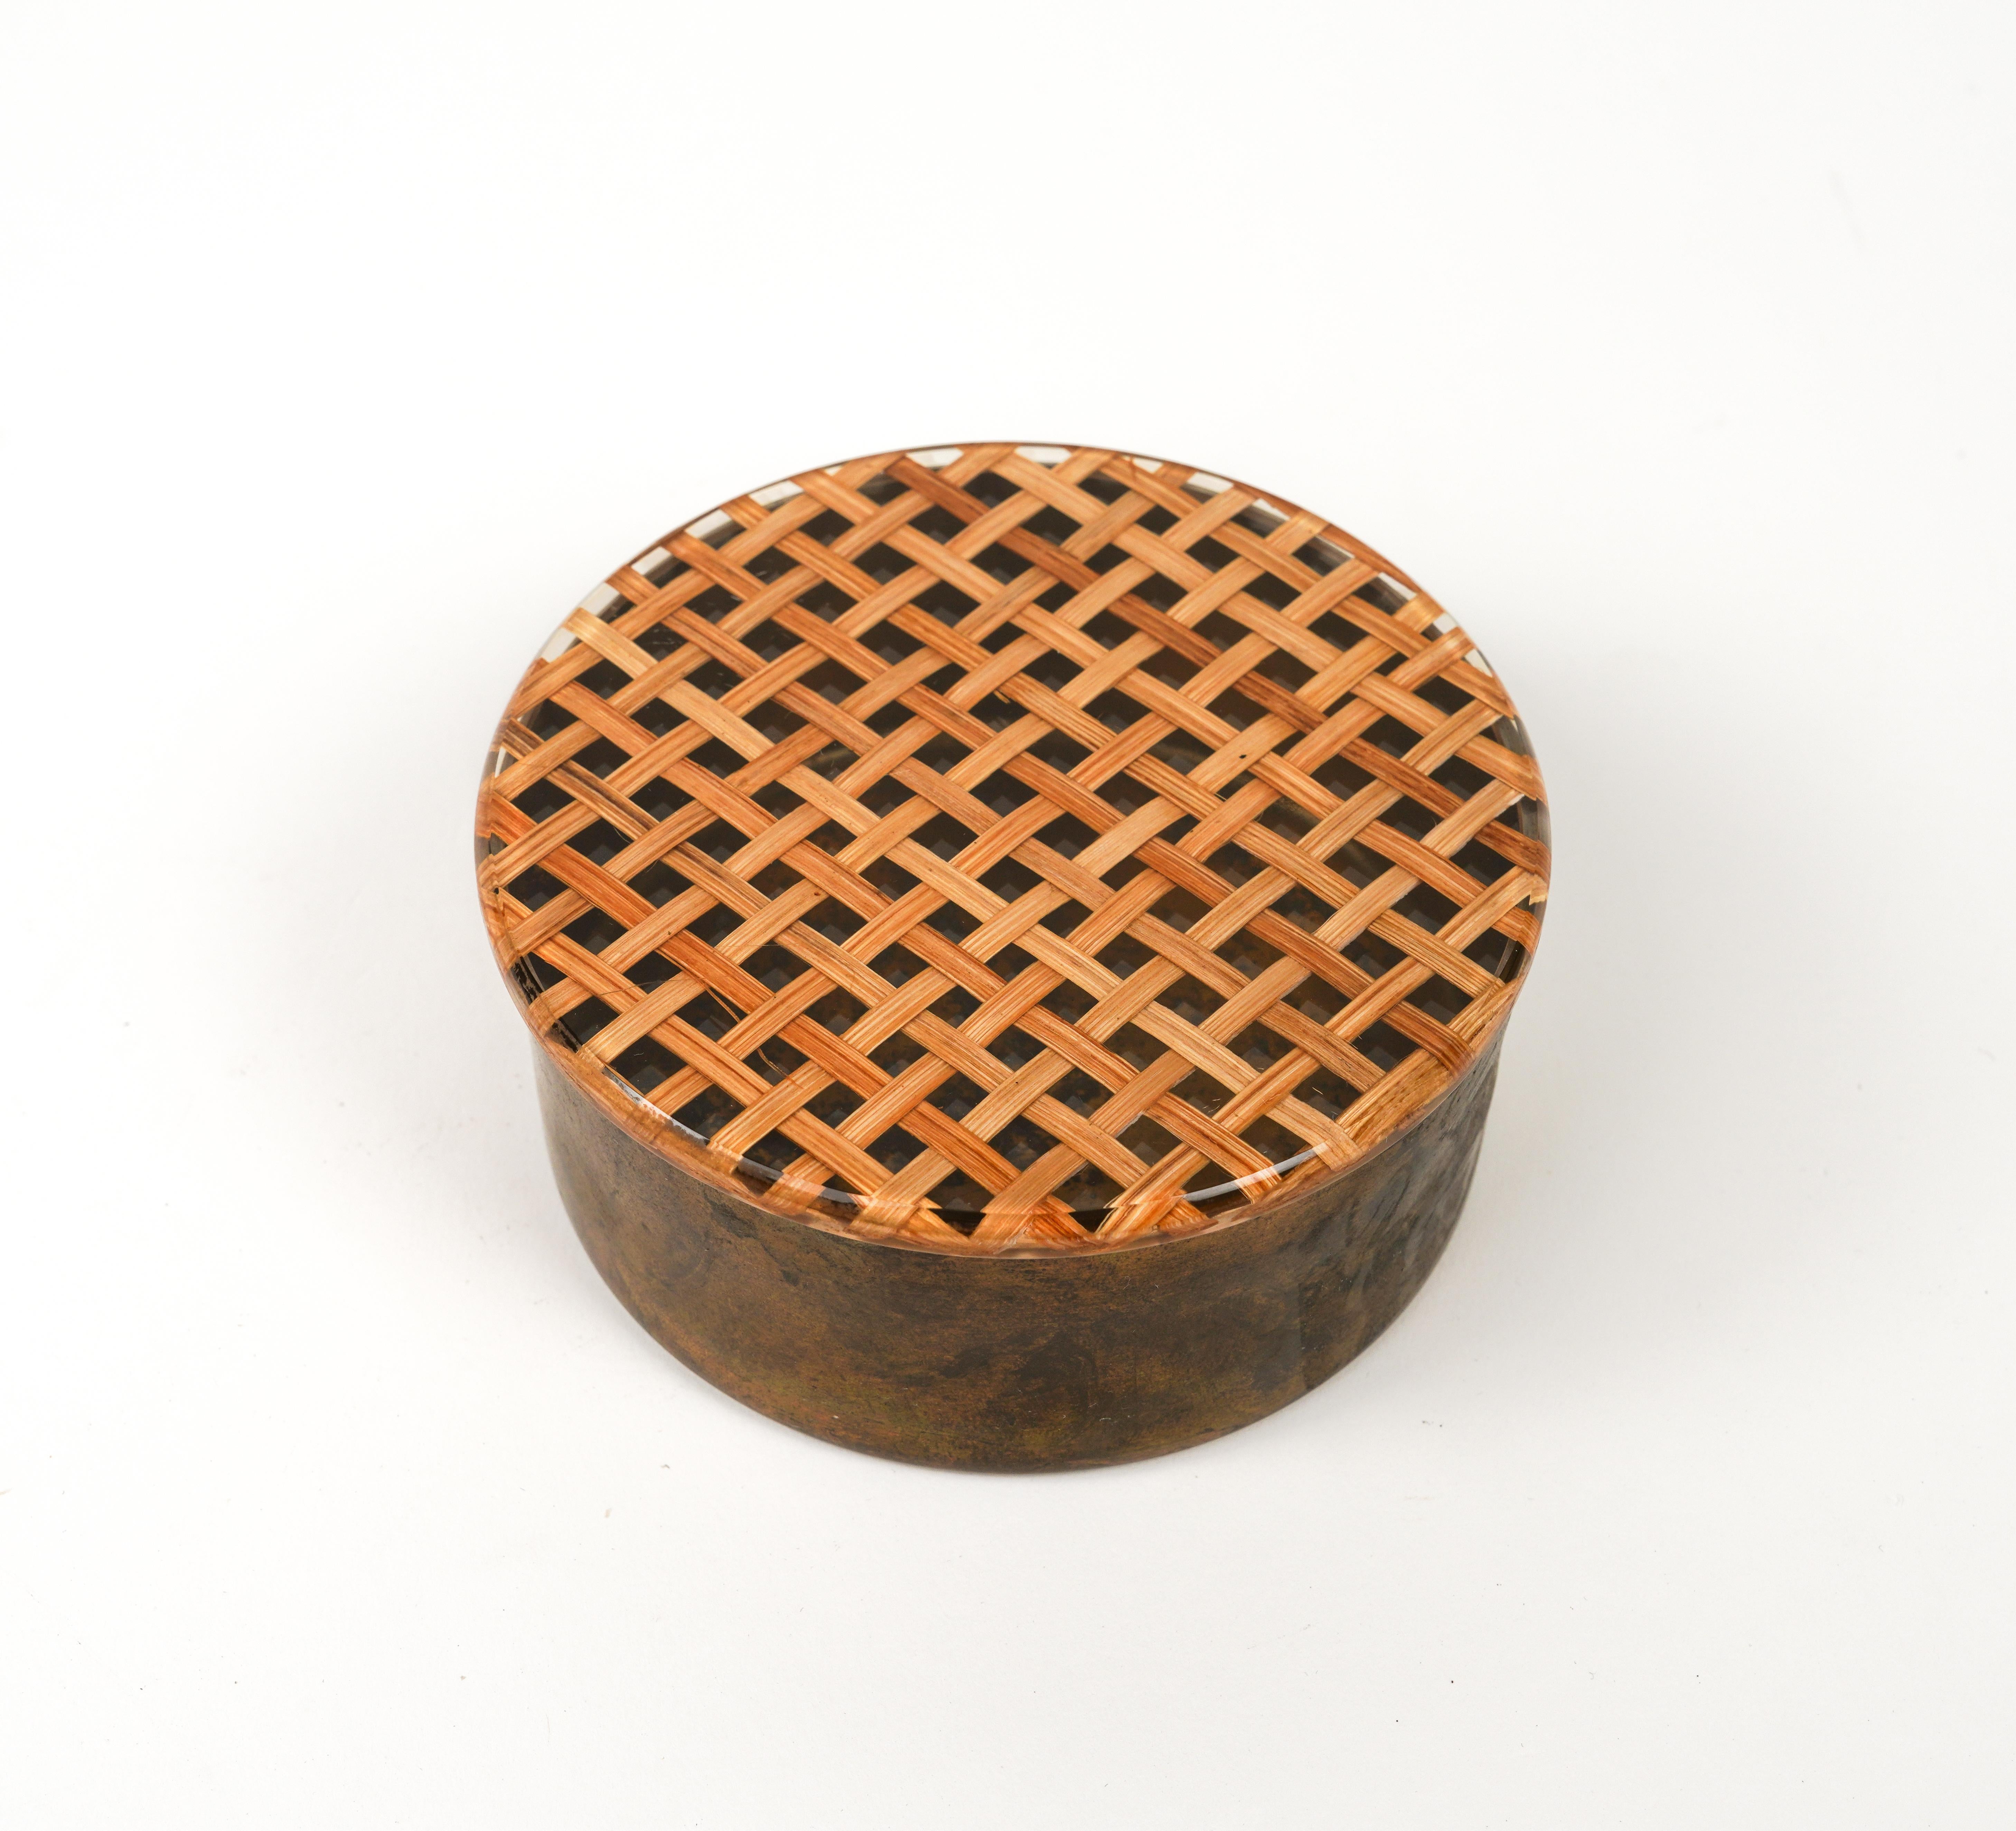 Midcentury Round Box in Brass, Lucite & Rattan Christian Dior Style, Italy 1970s For Sale 2